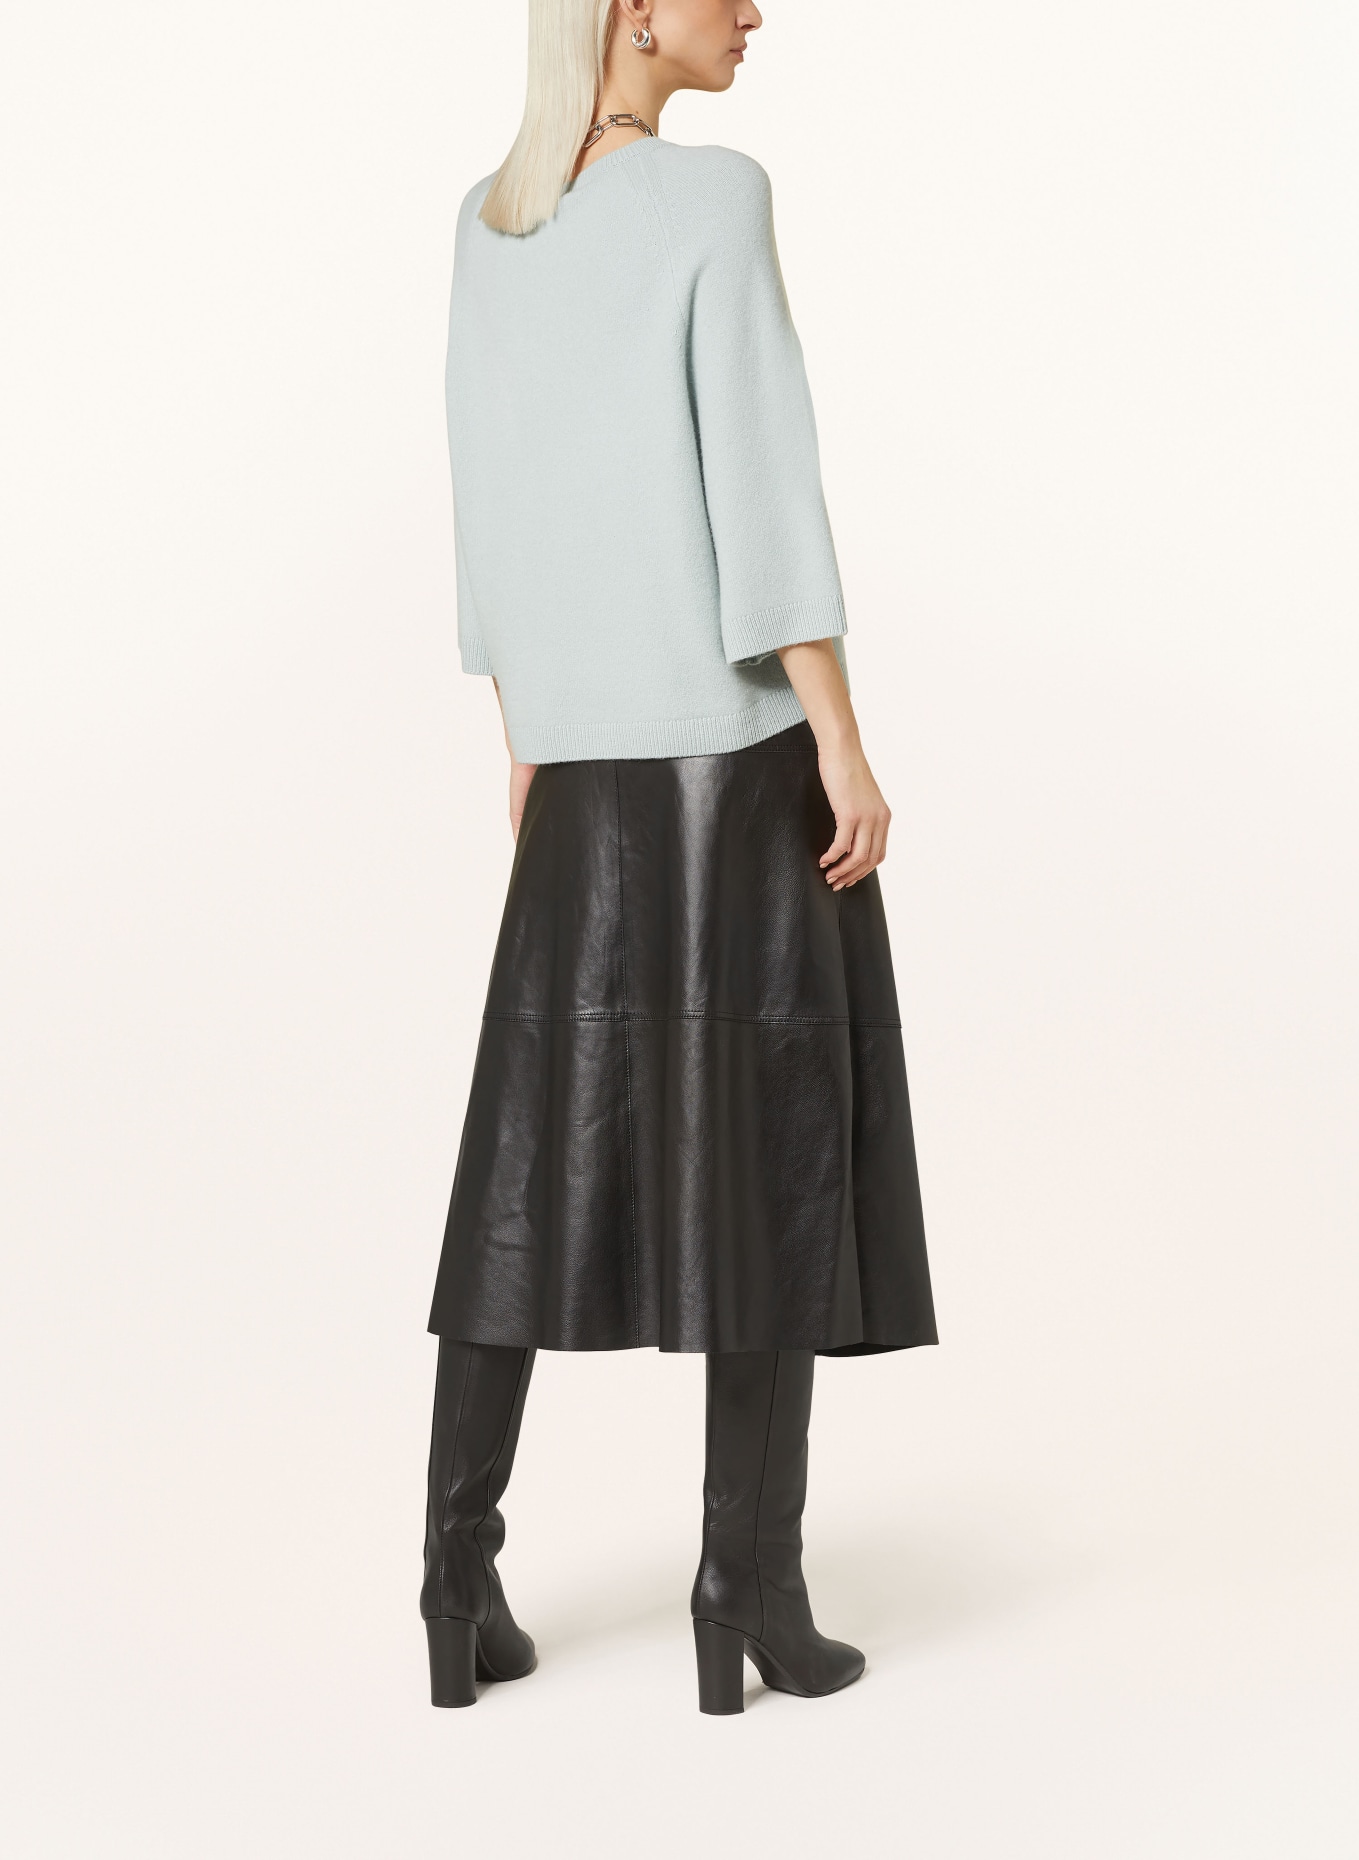 FTC CASHMERE Cashmere sweater with 3/4 sleeves, Color: LIGHT BLUE (Image 3)